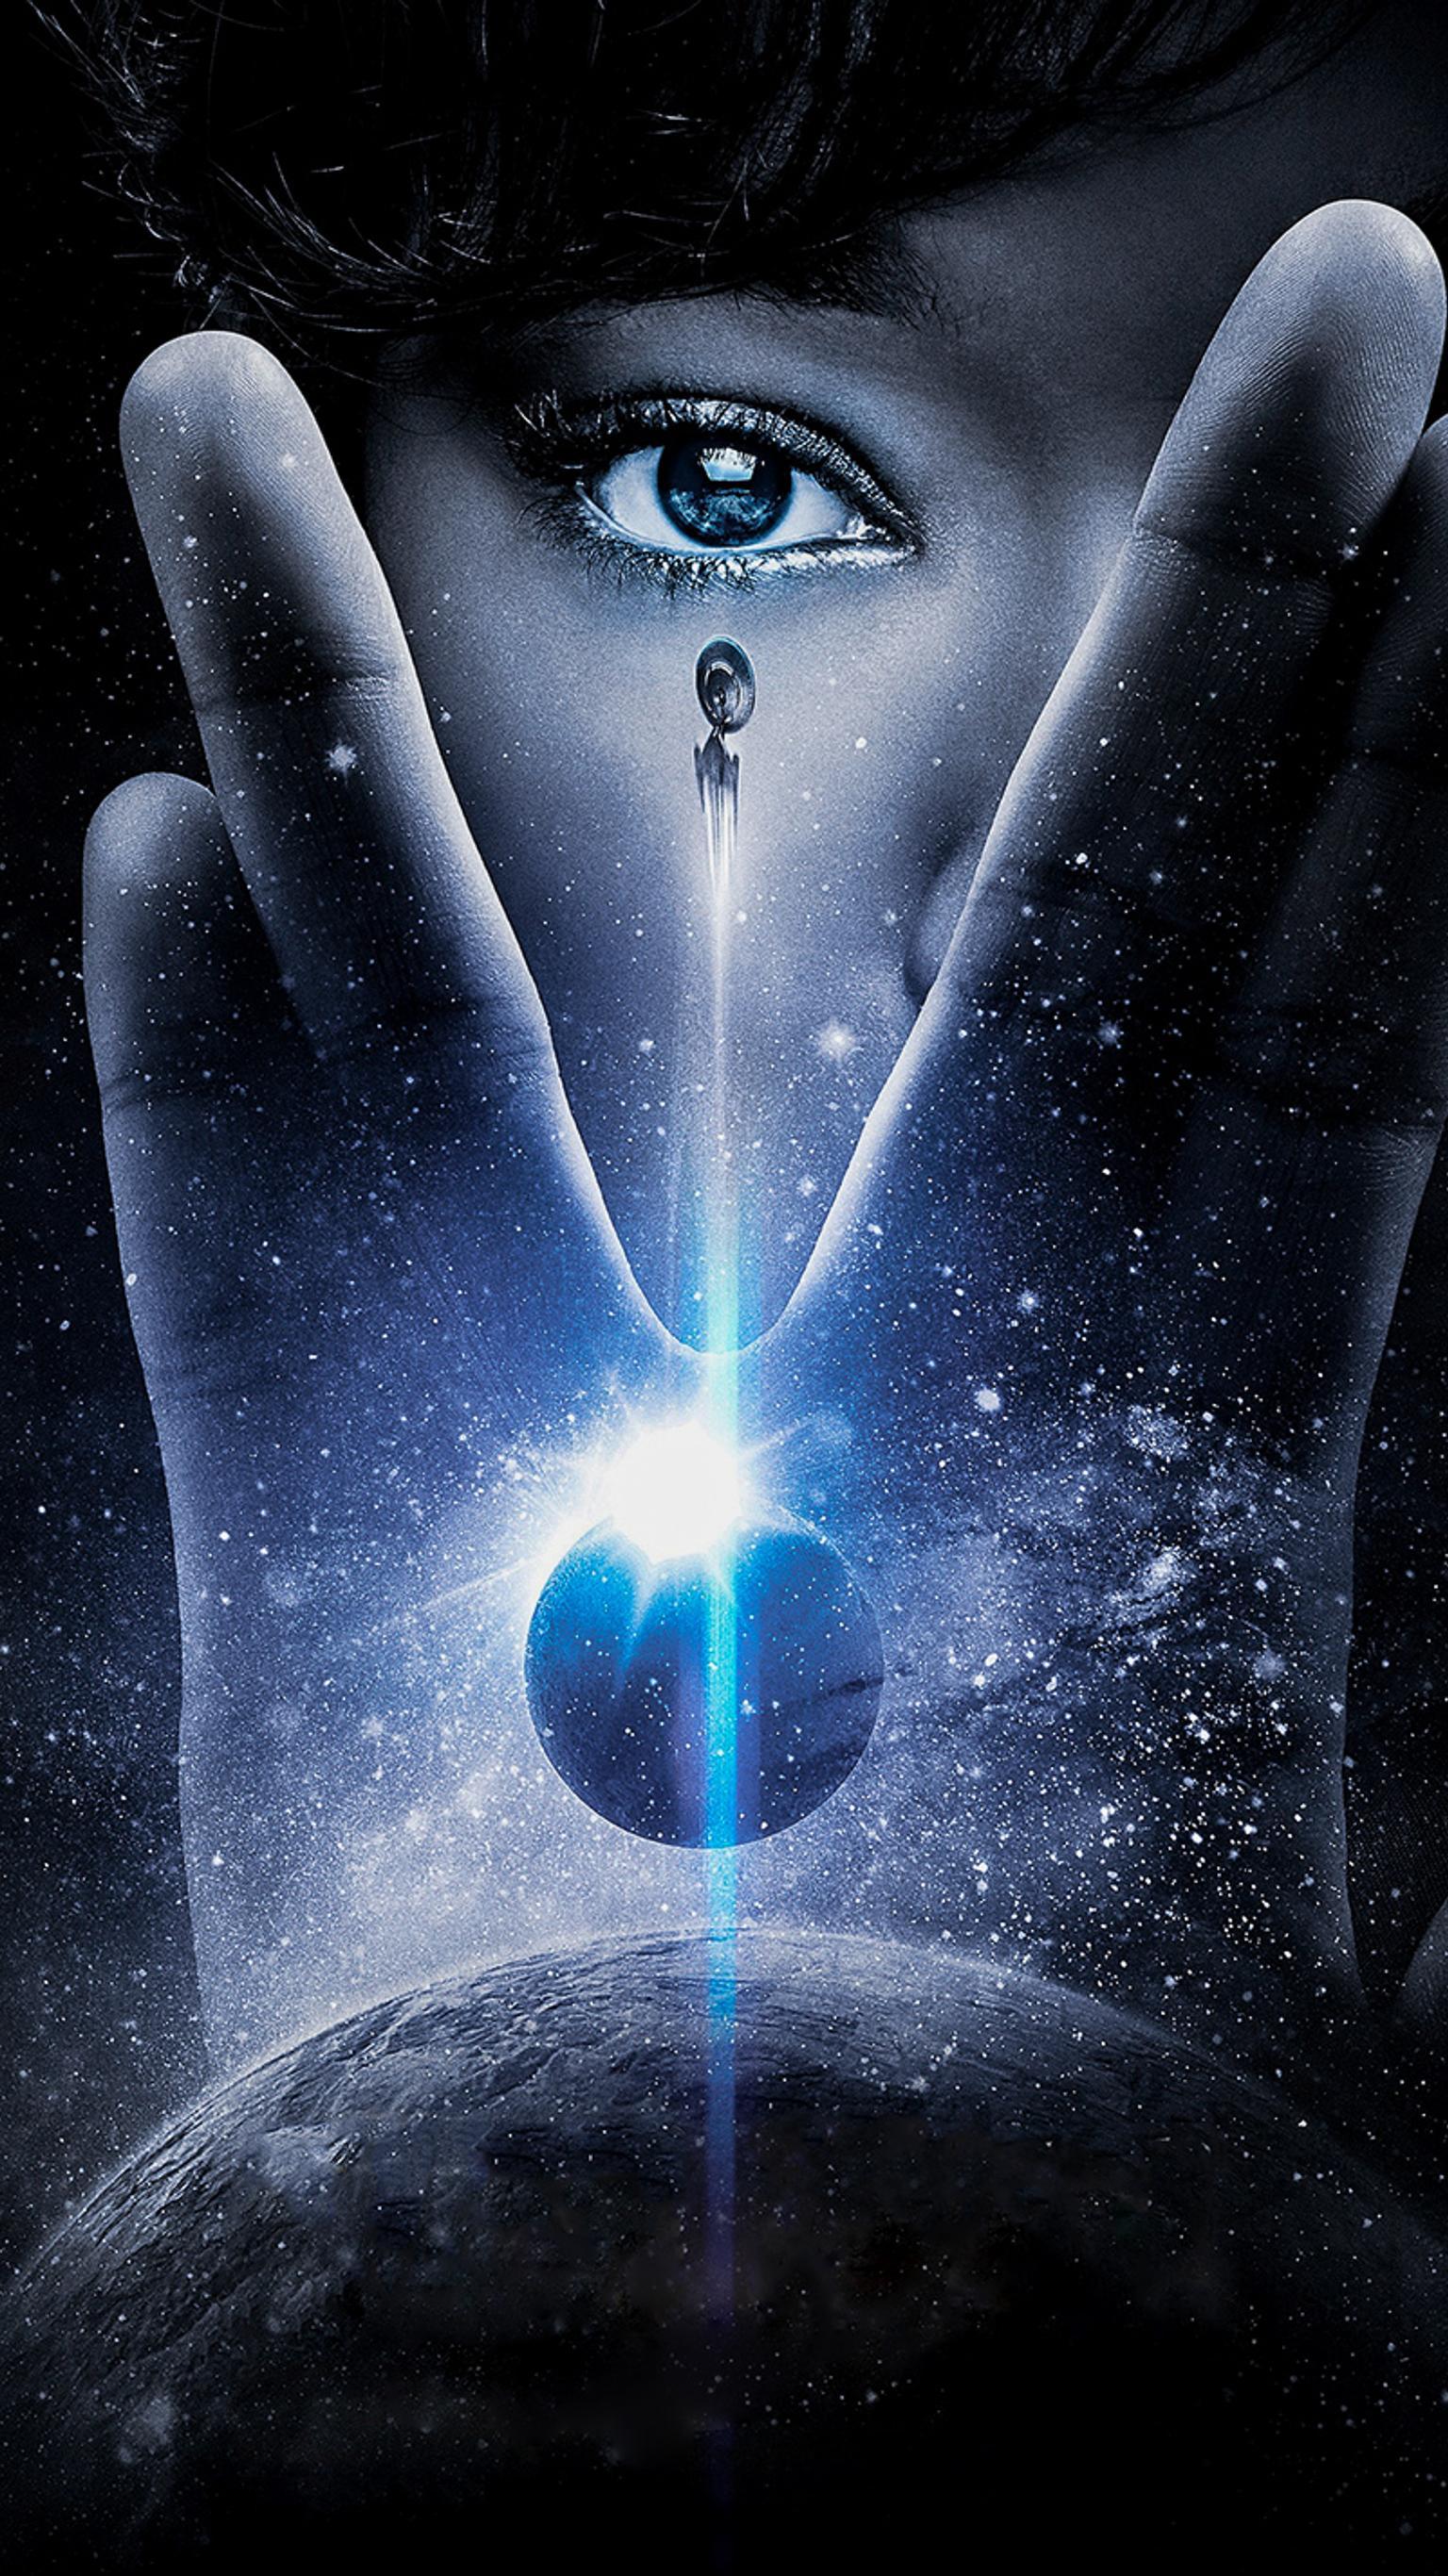 A Star Trek: Discovery poster with a hand holding a spaceship above a planet. - Star Trek